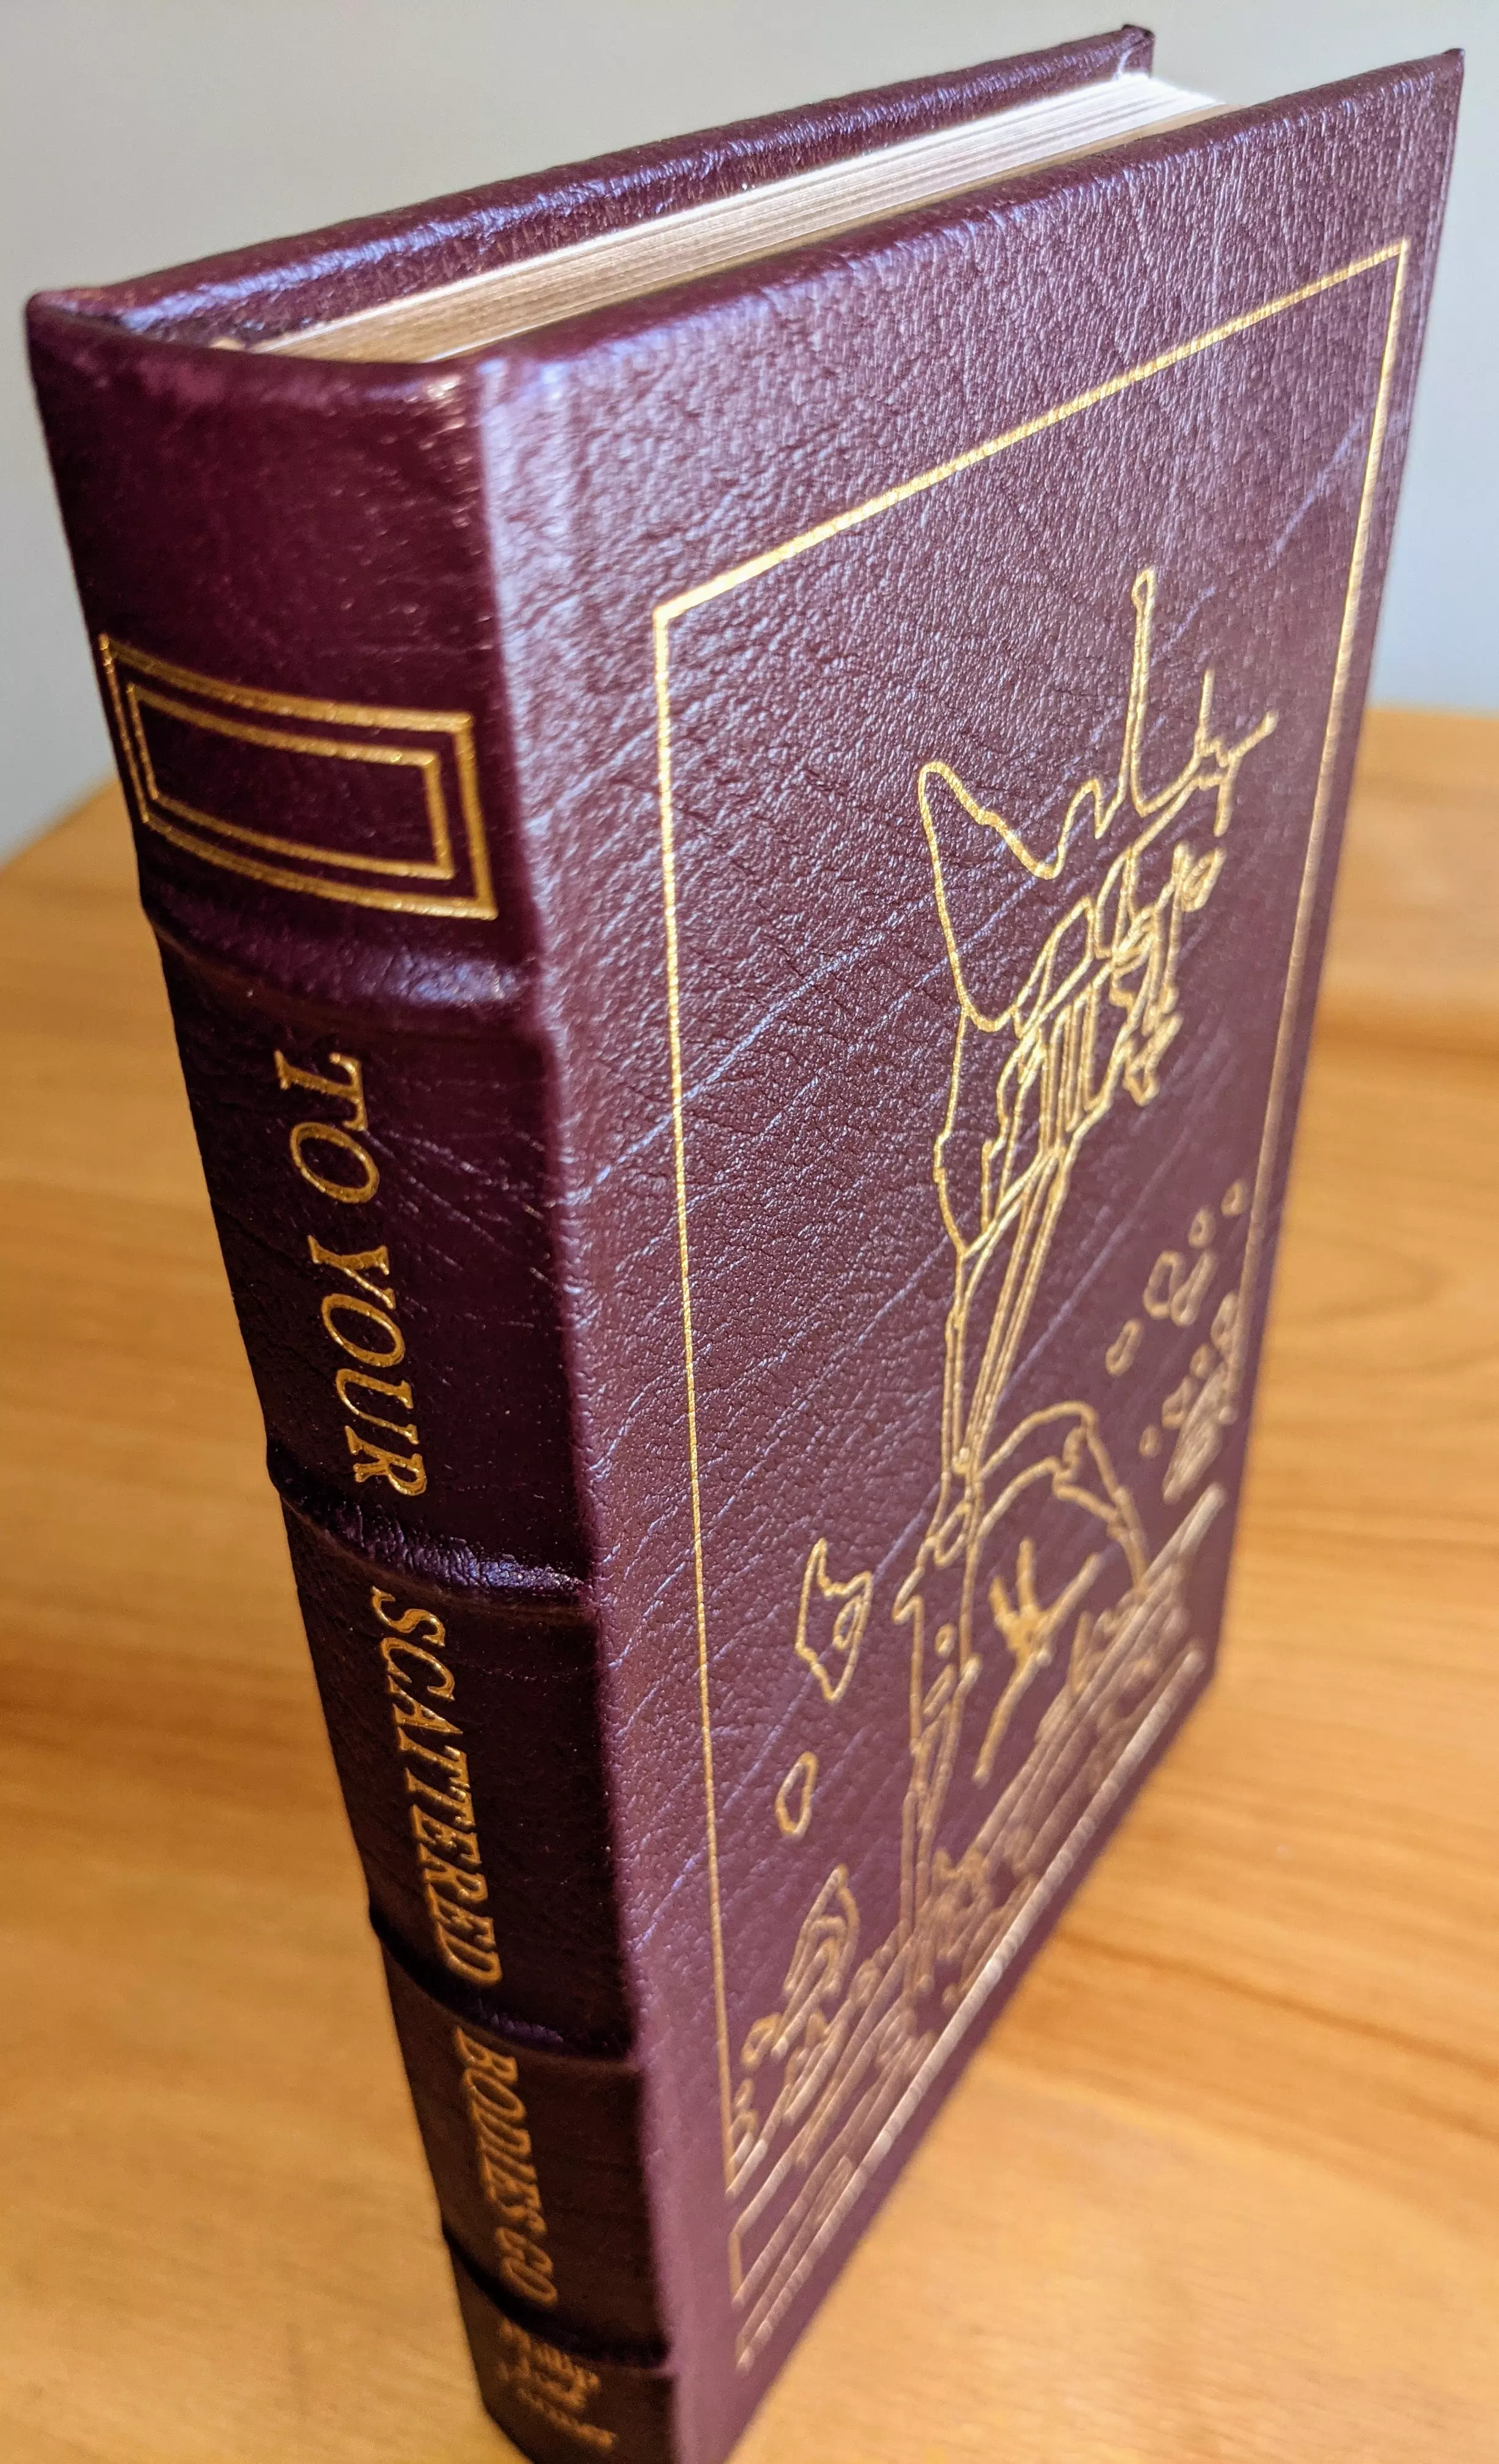 Stunning Red Leather Bound hardback book with hubbed spine, cover artwork in 22kt gold, printed on archival paper with gold gilded edges, smyth sewing & concealed muslin joints
	  - original artwork by Richard Powers